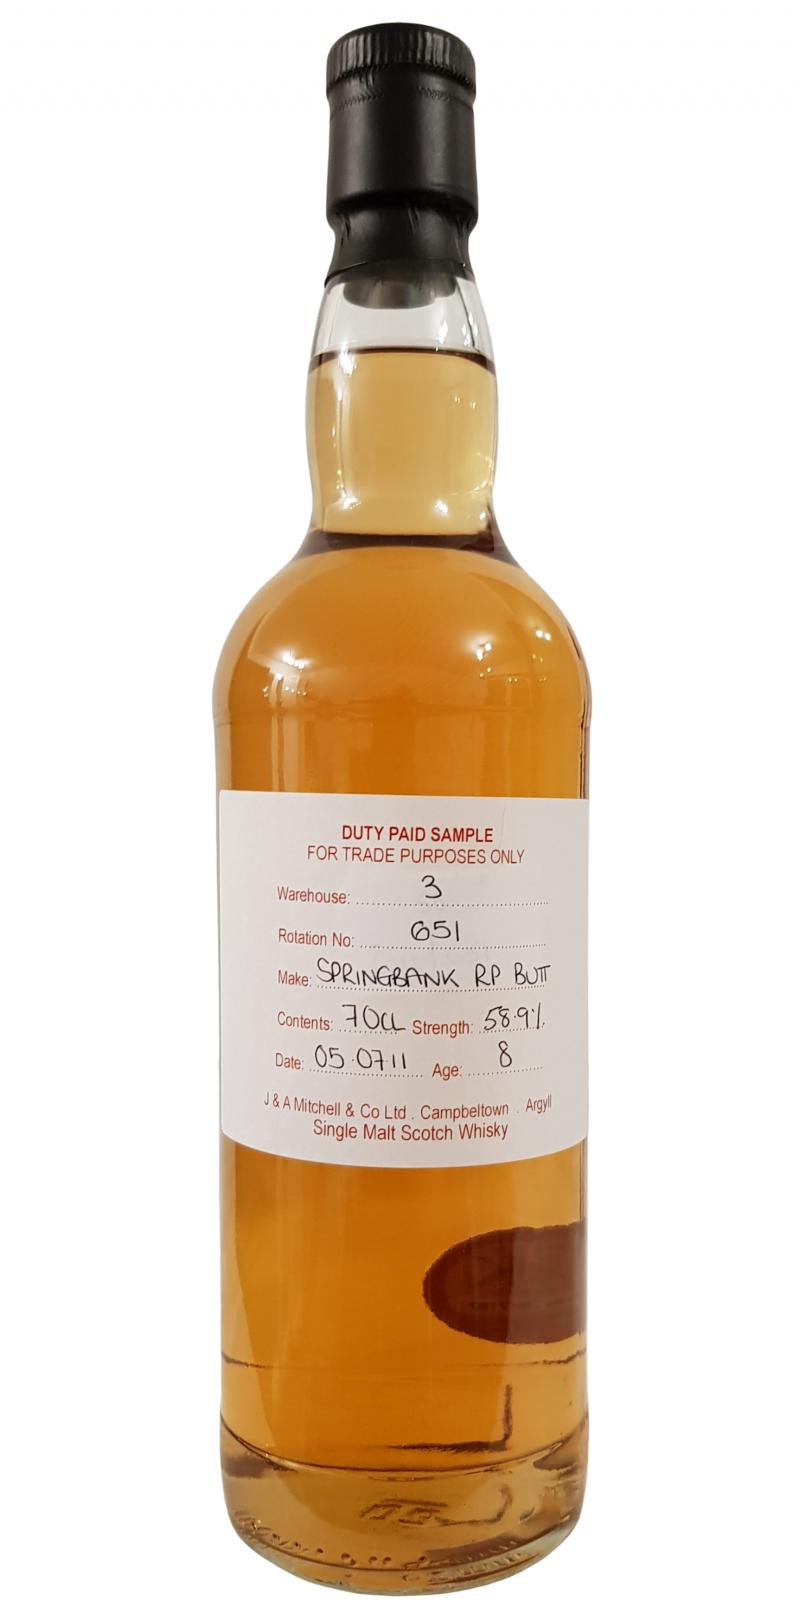 Springbank 2011 Duty Paid Sample For Trade Purposes Only Refill Port Butt Rotation 651 58.9% 700ml